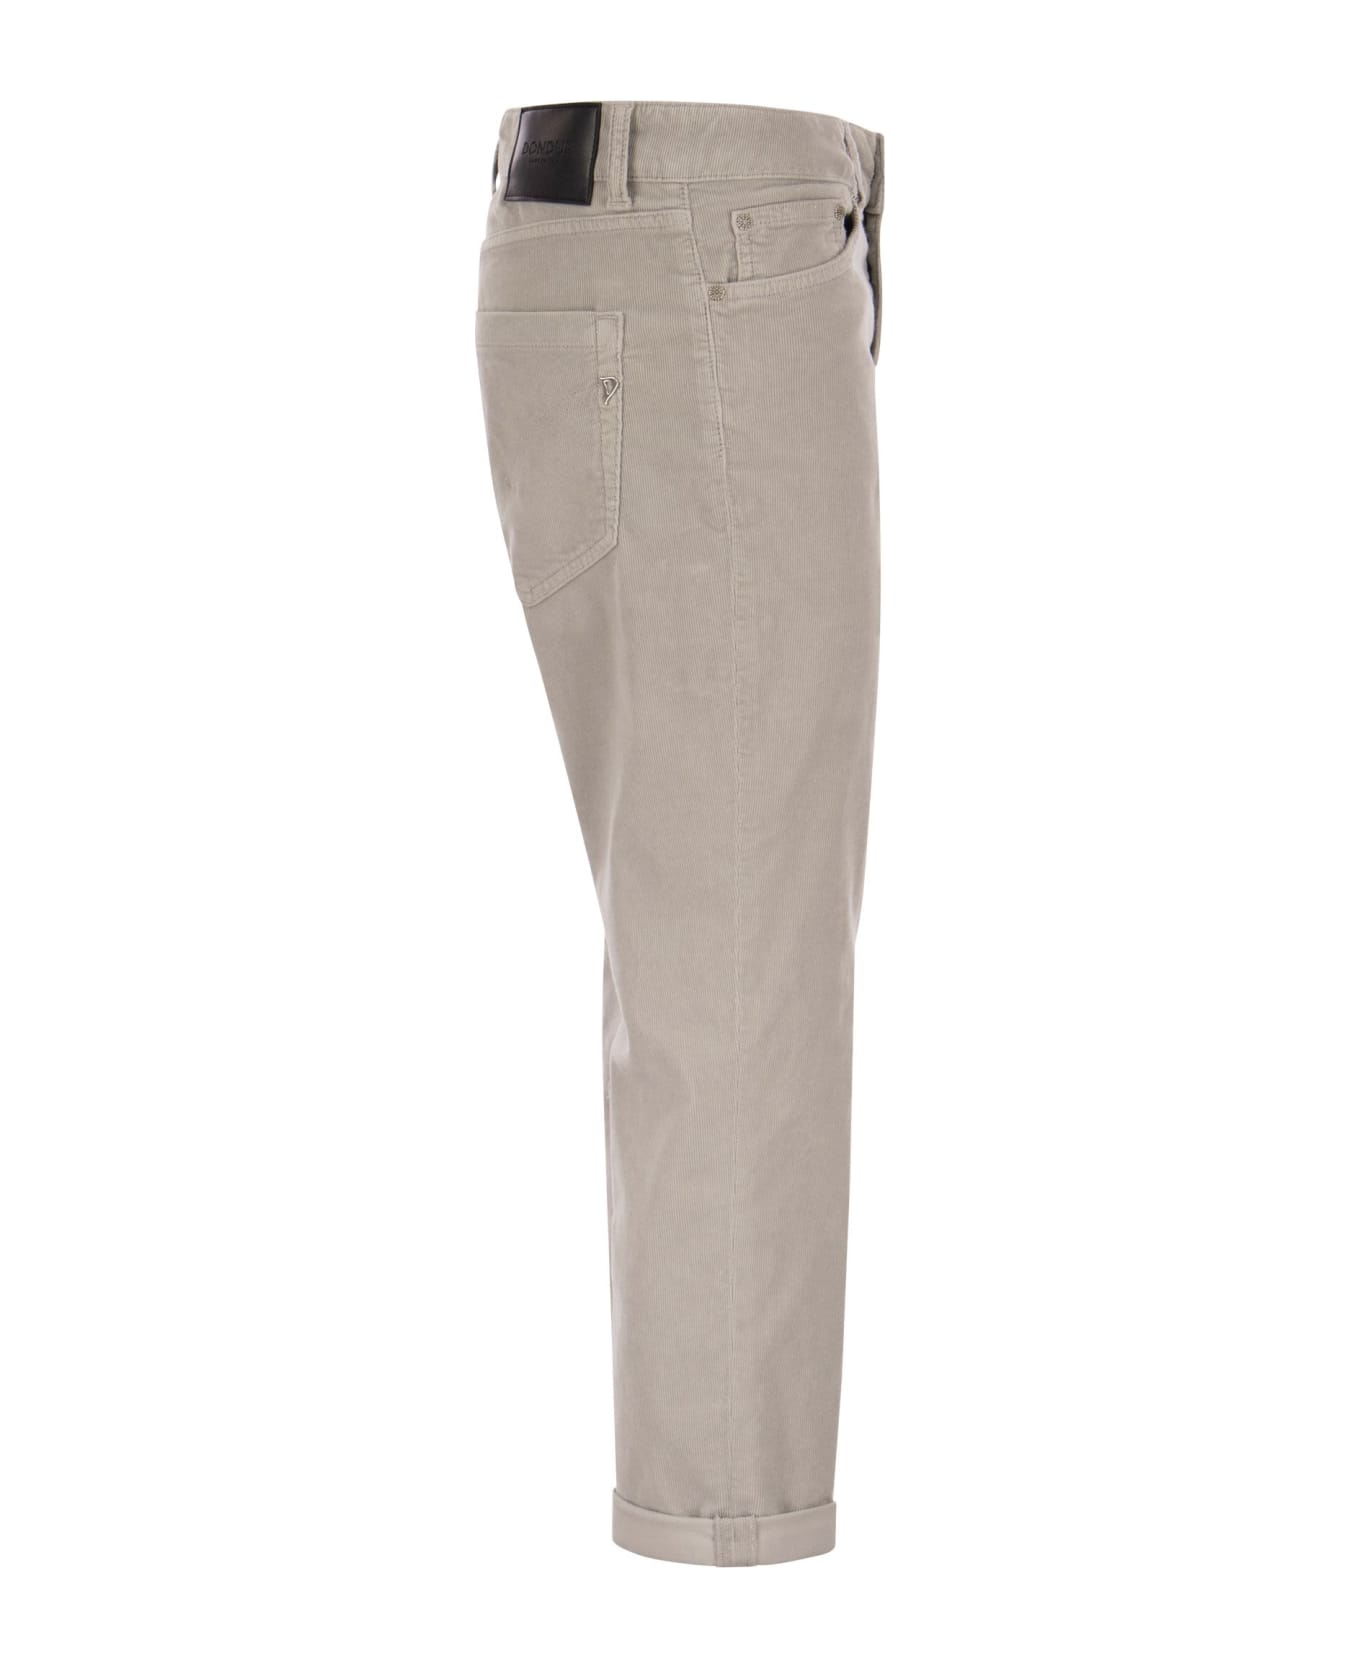 Dondup Koons - Multi-striped Velvet Trousers With Jewelled Buttons - Grey デニム